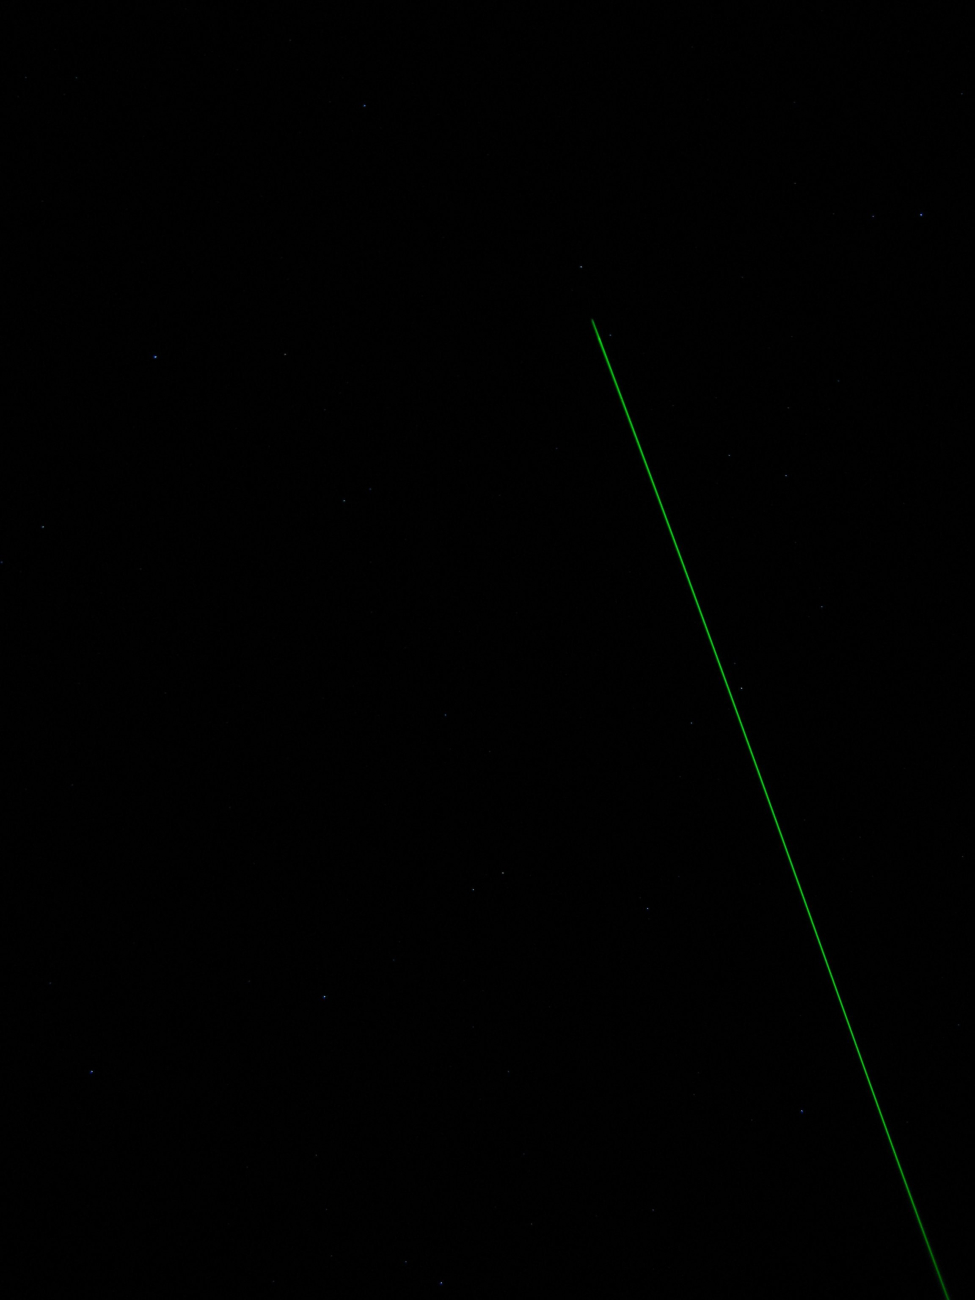 A green laser shooting into the night sky monitors various aerosols andparticulate matter such as volcanic dust and various forms of air pollution inthe atmosphere